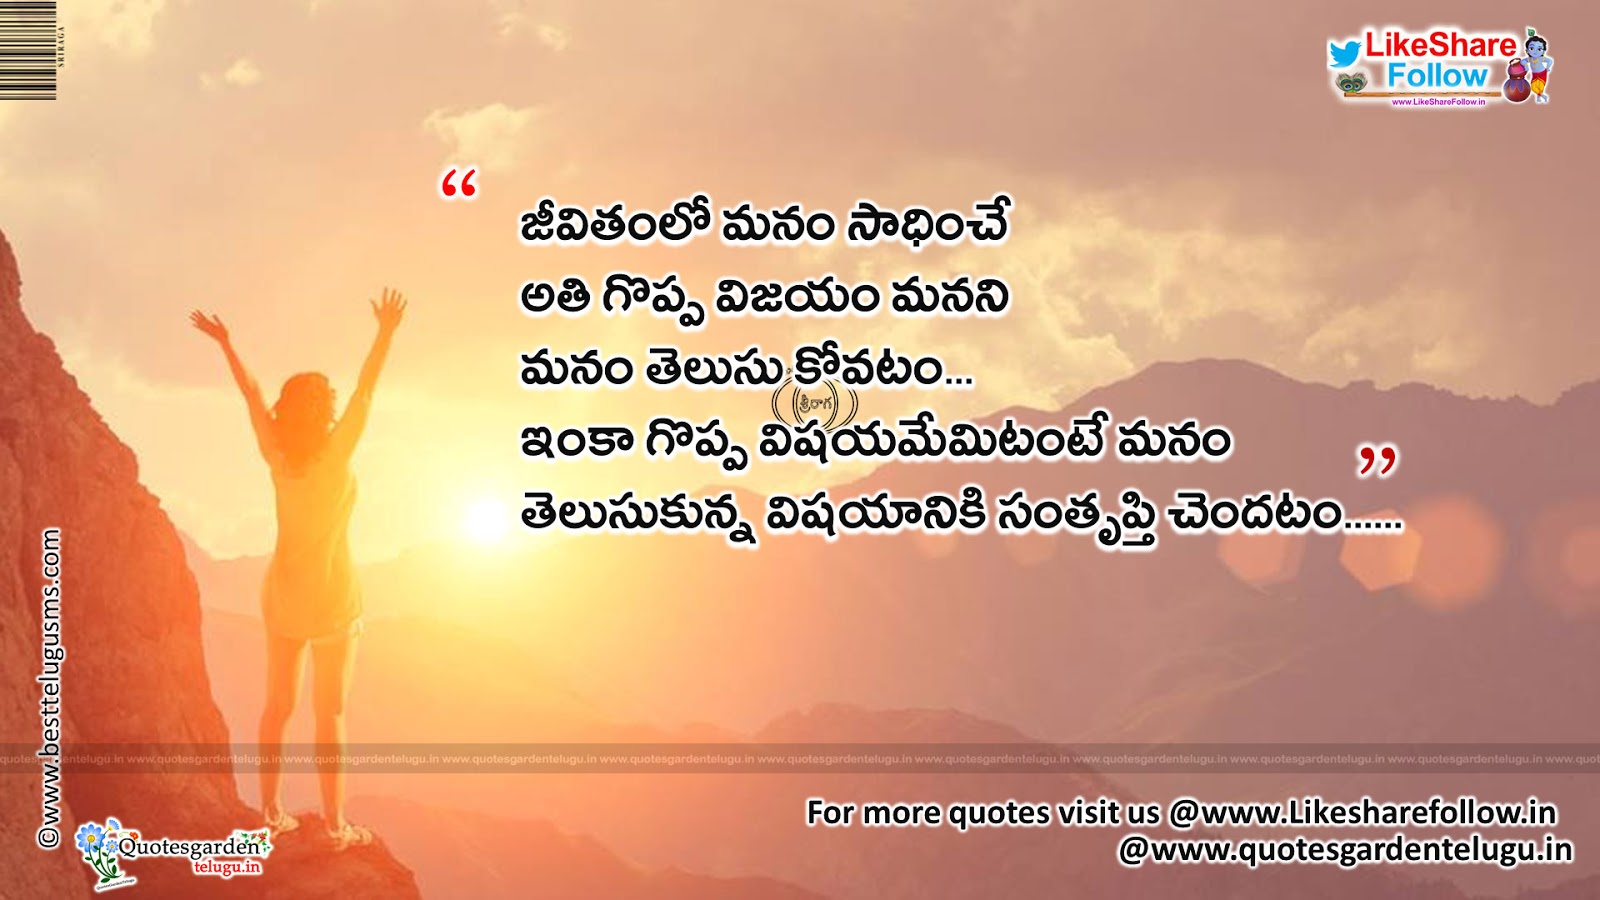 Best Inspirational Quotes in telugu images 392 | Like Share Follow